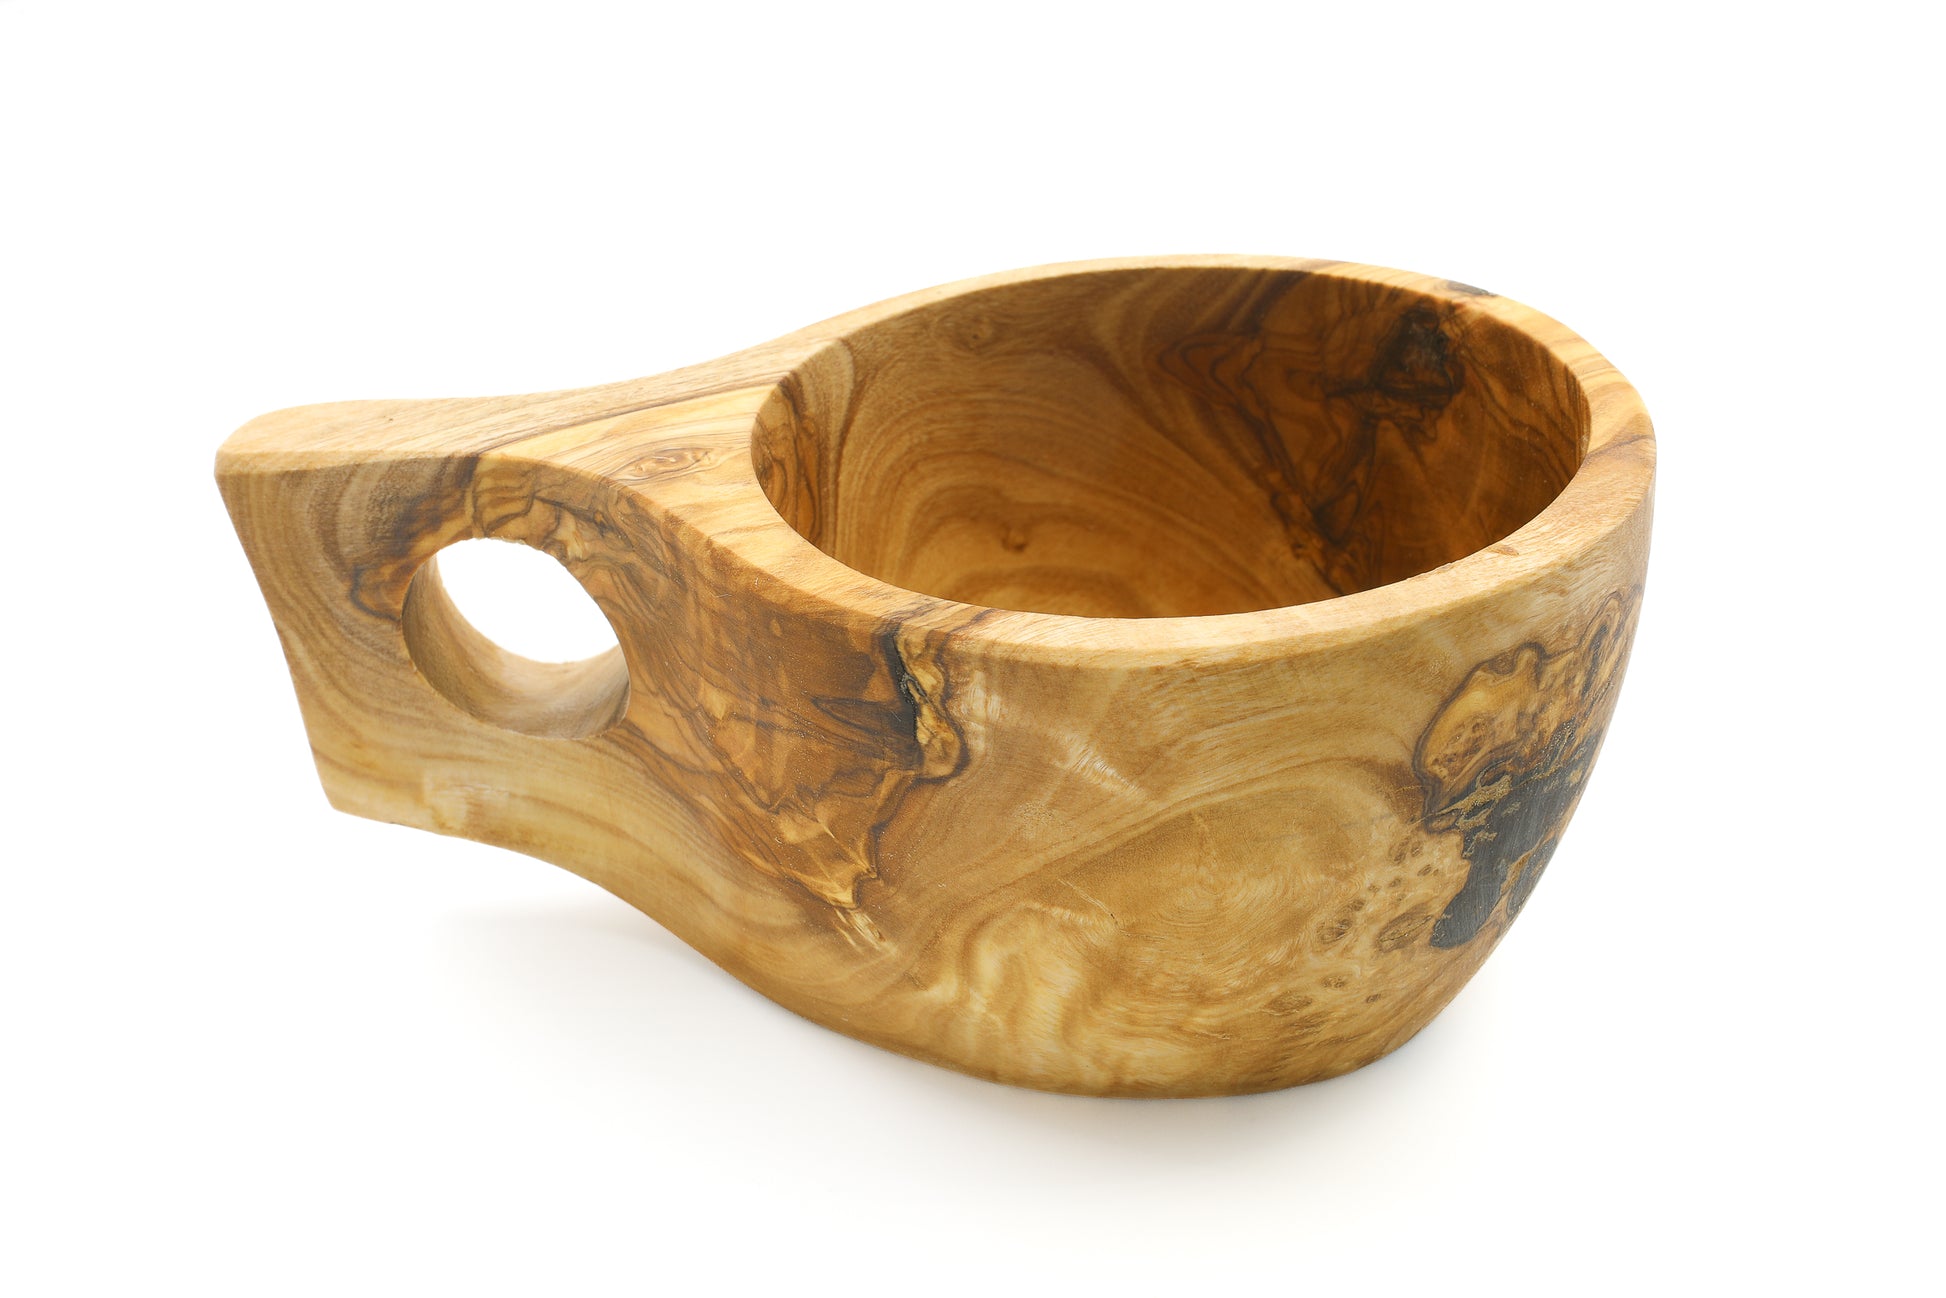 Handcrafted olive wood kuksa, a Nordic-style mug